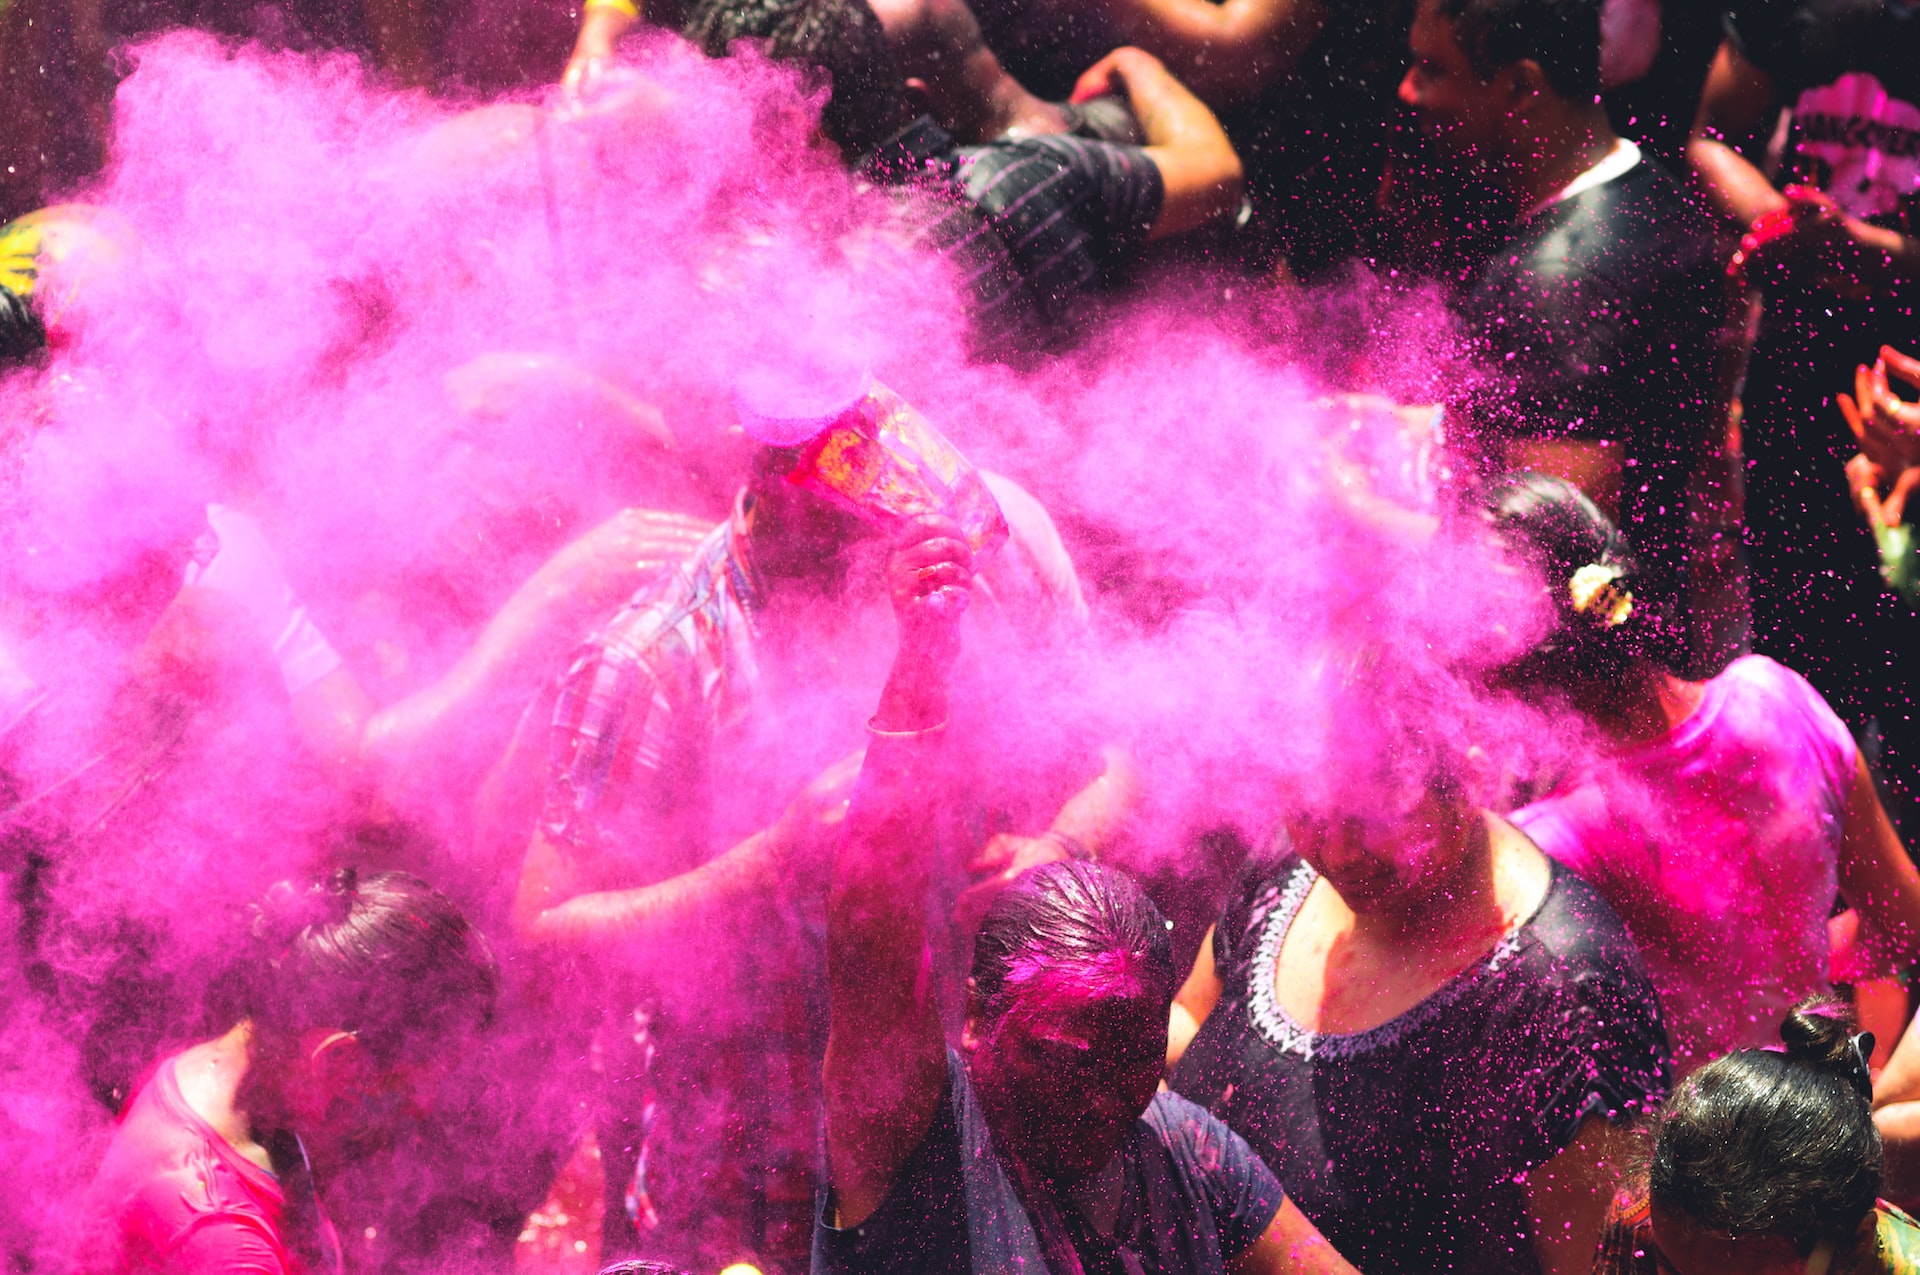 Pink powder bursting in the air above people's heads.